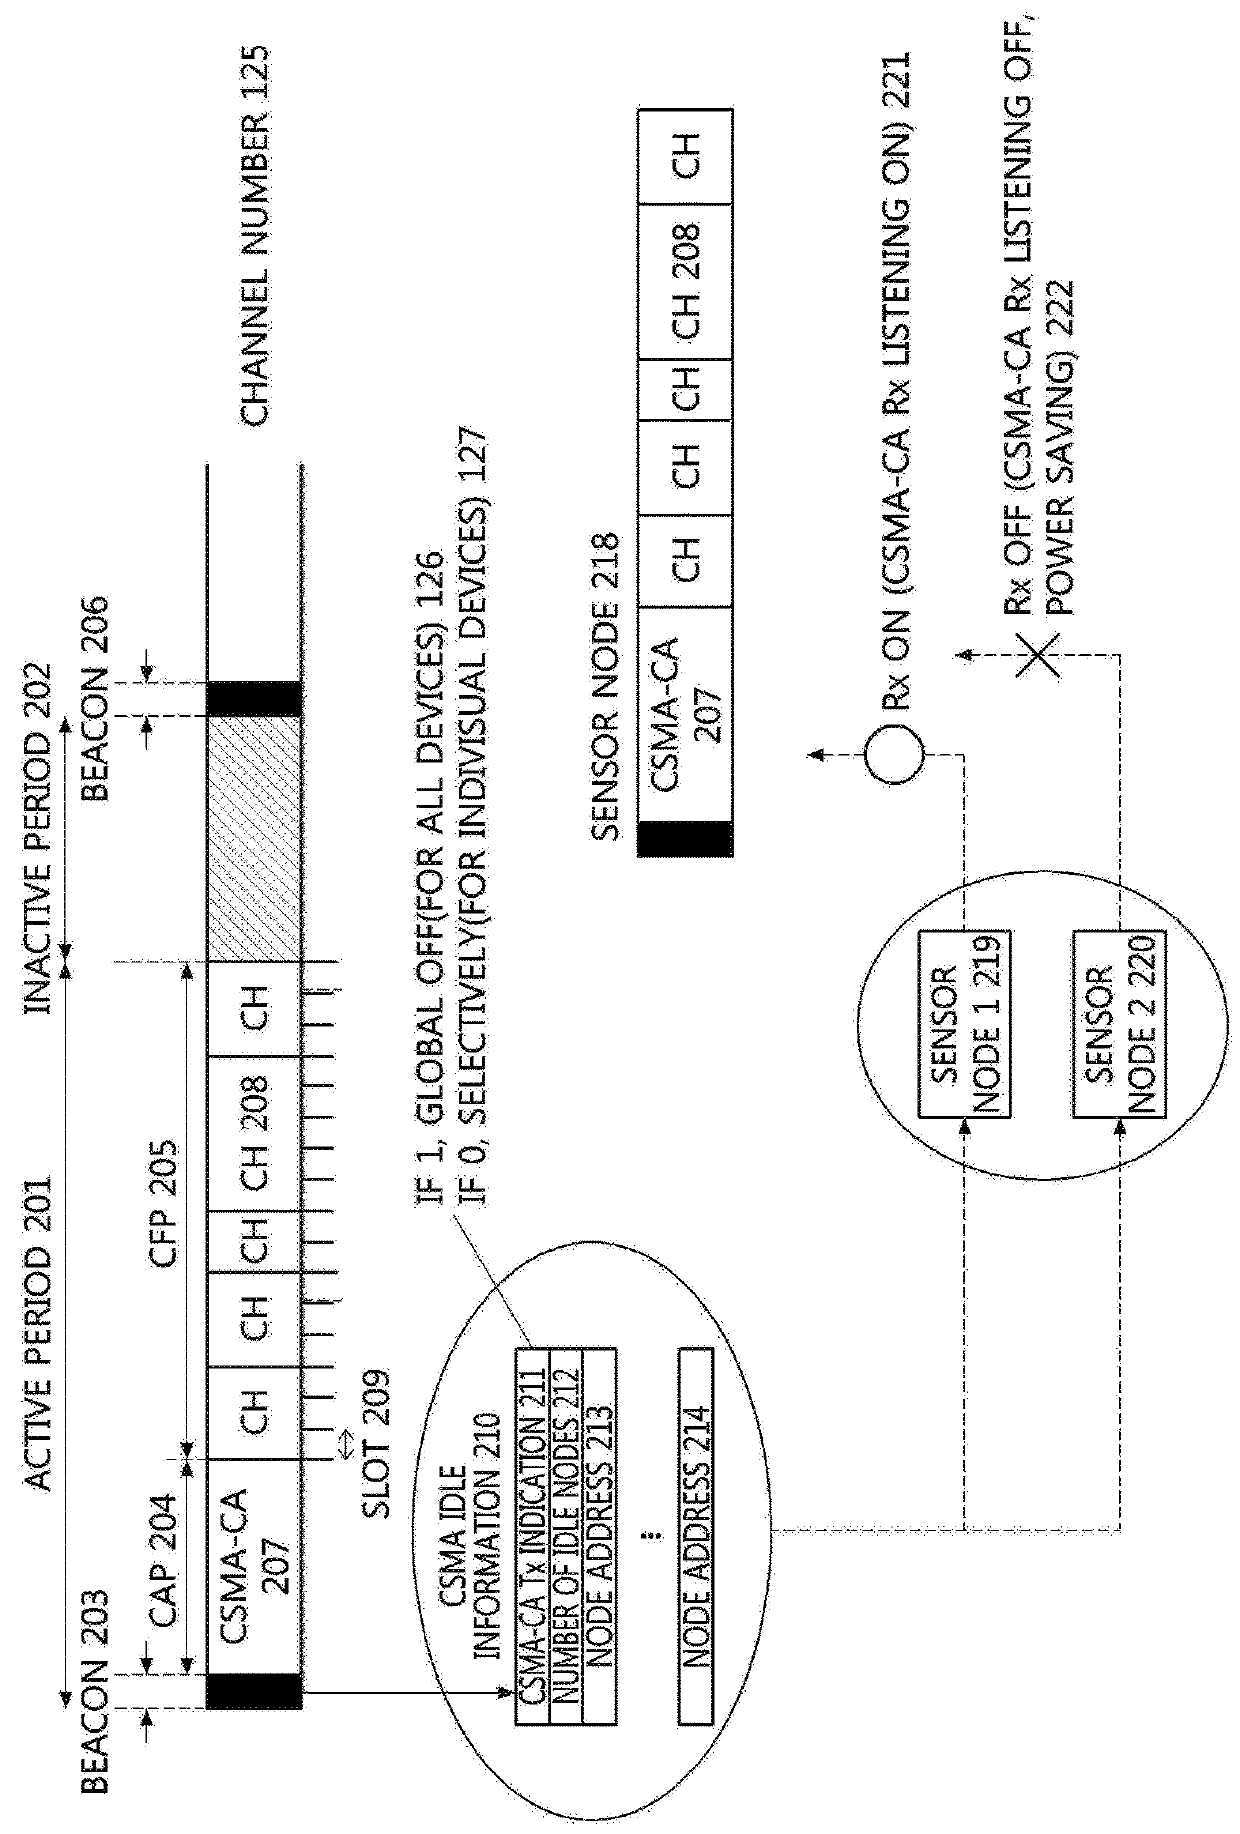 Channel allocation system and method for accomodating multiple nodes in sensor network